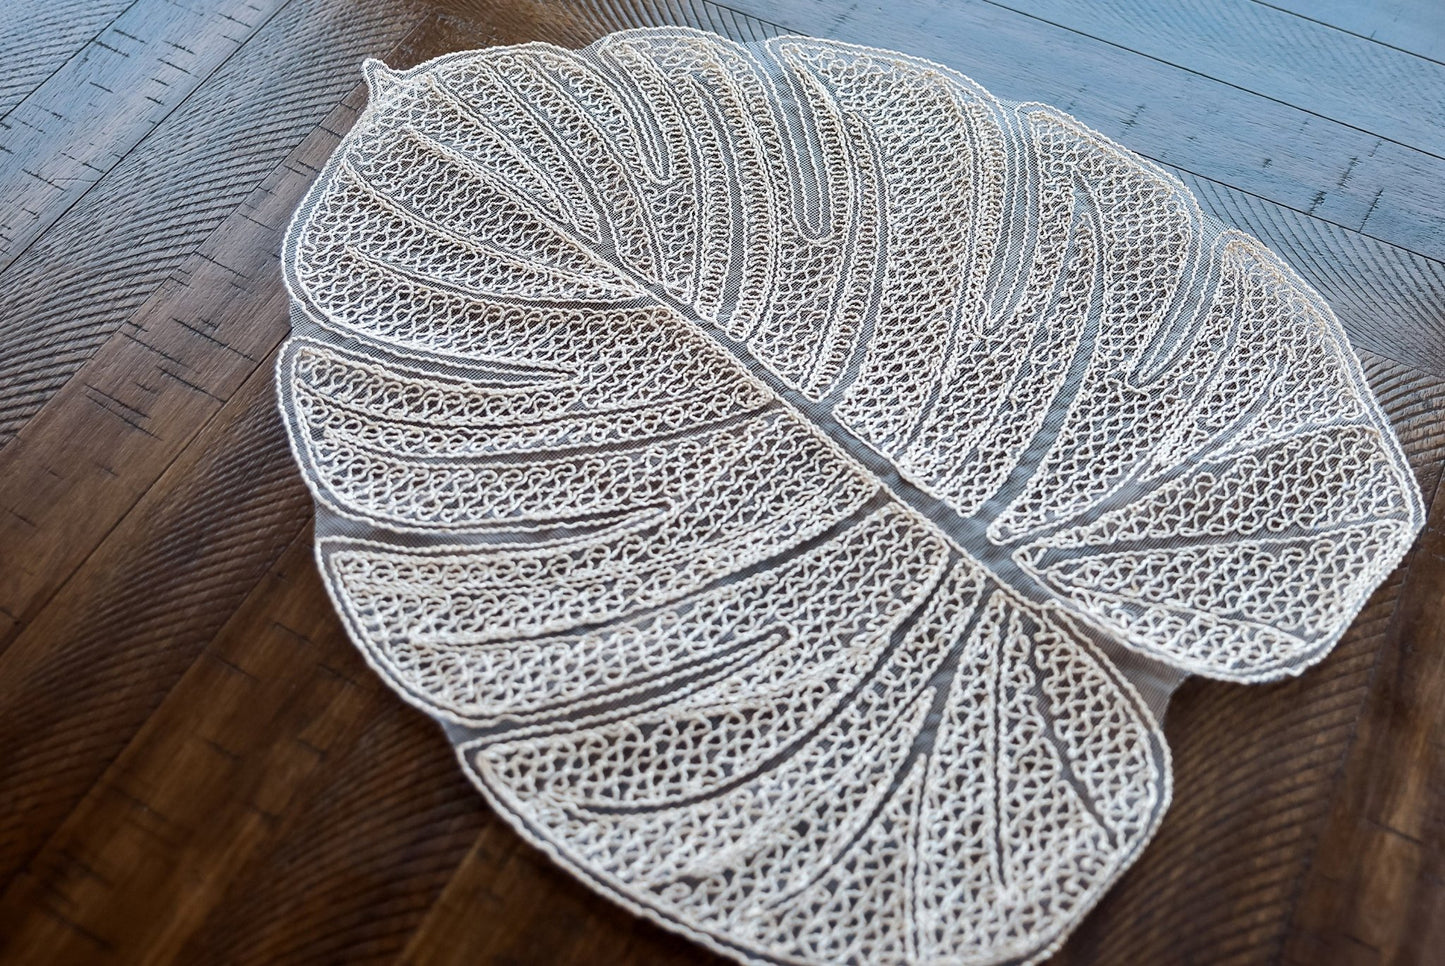 Lace Table Placemat - Hemsin Atelier